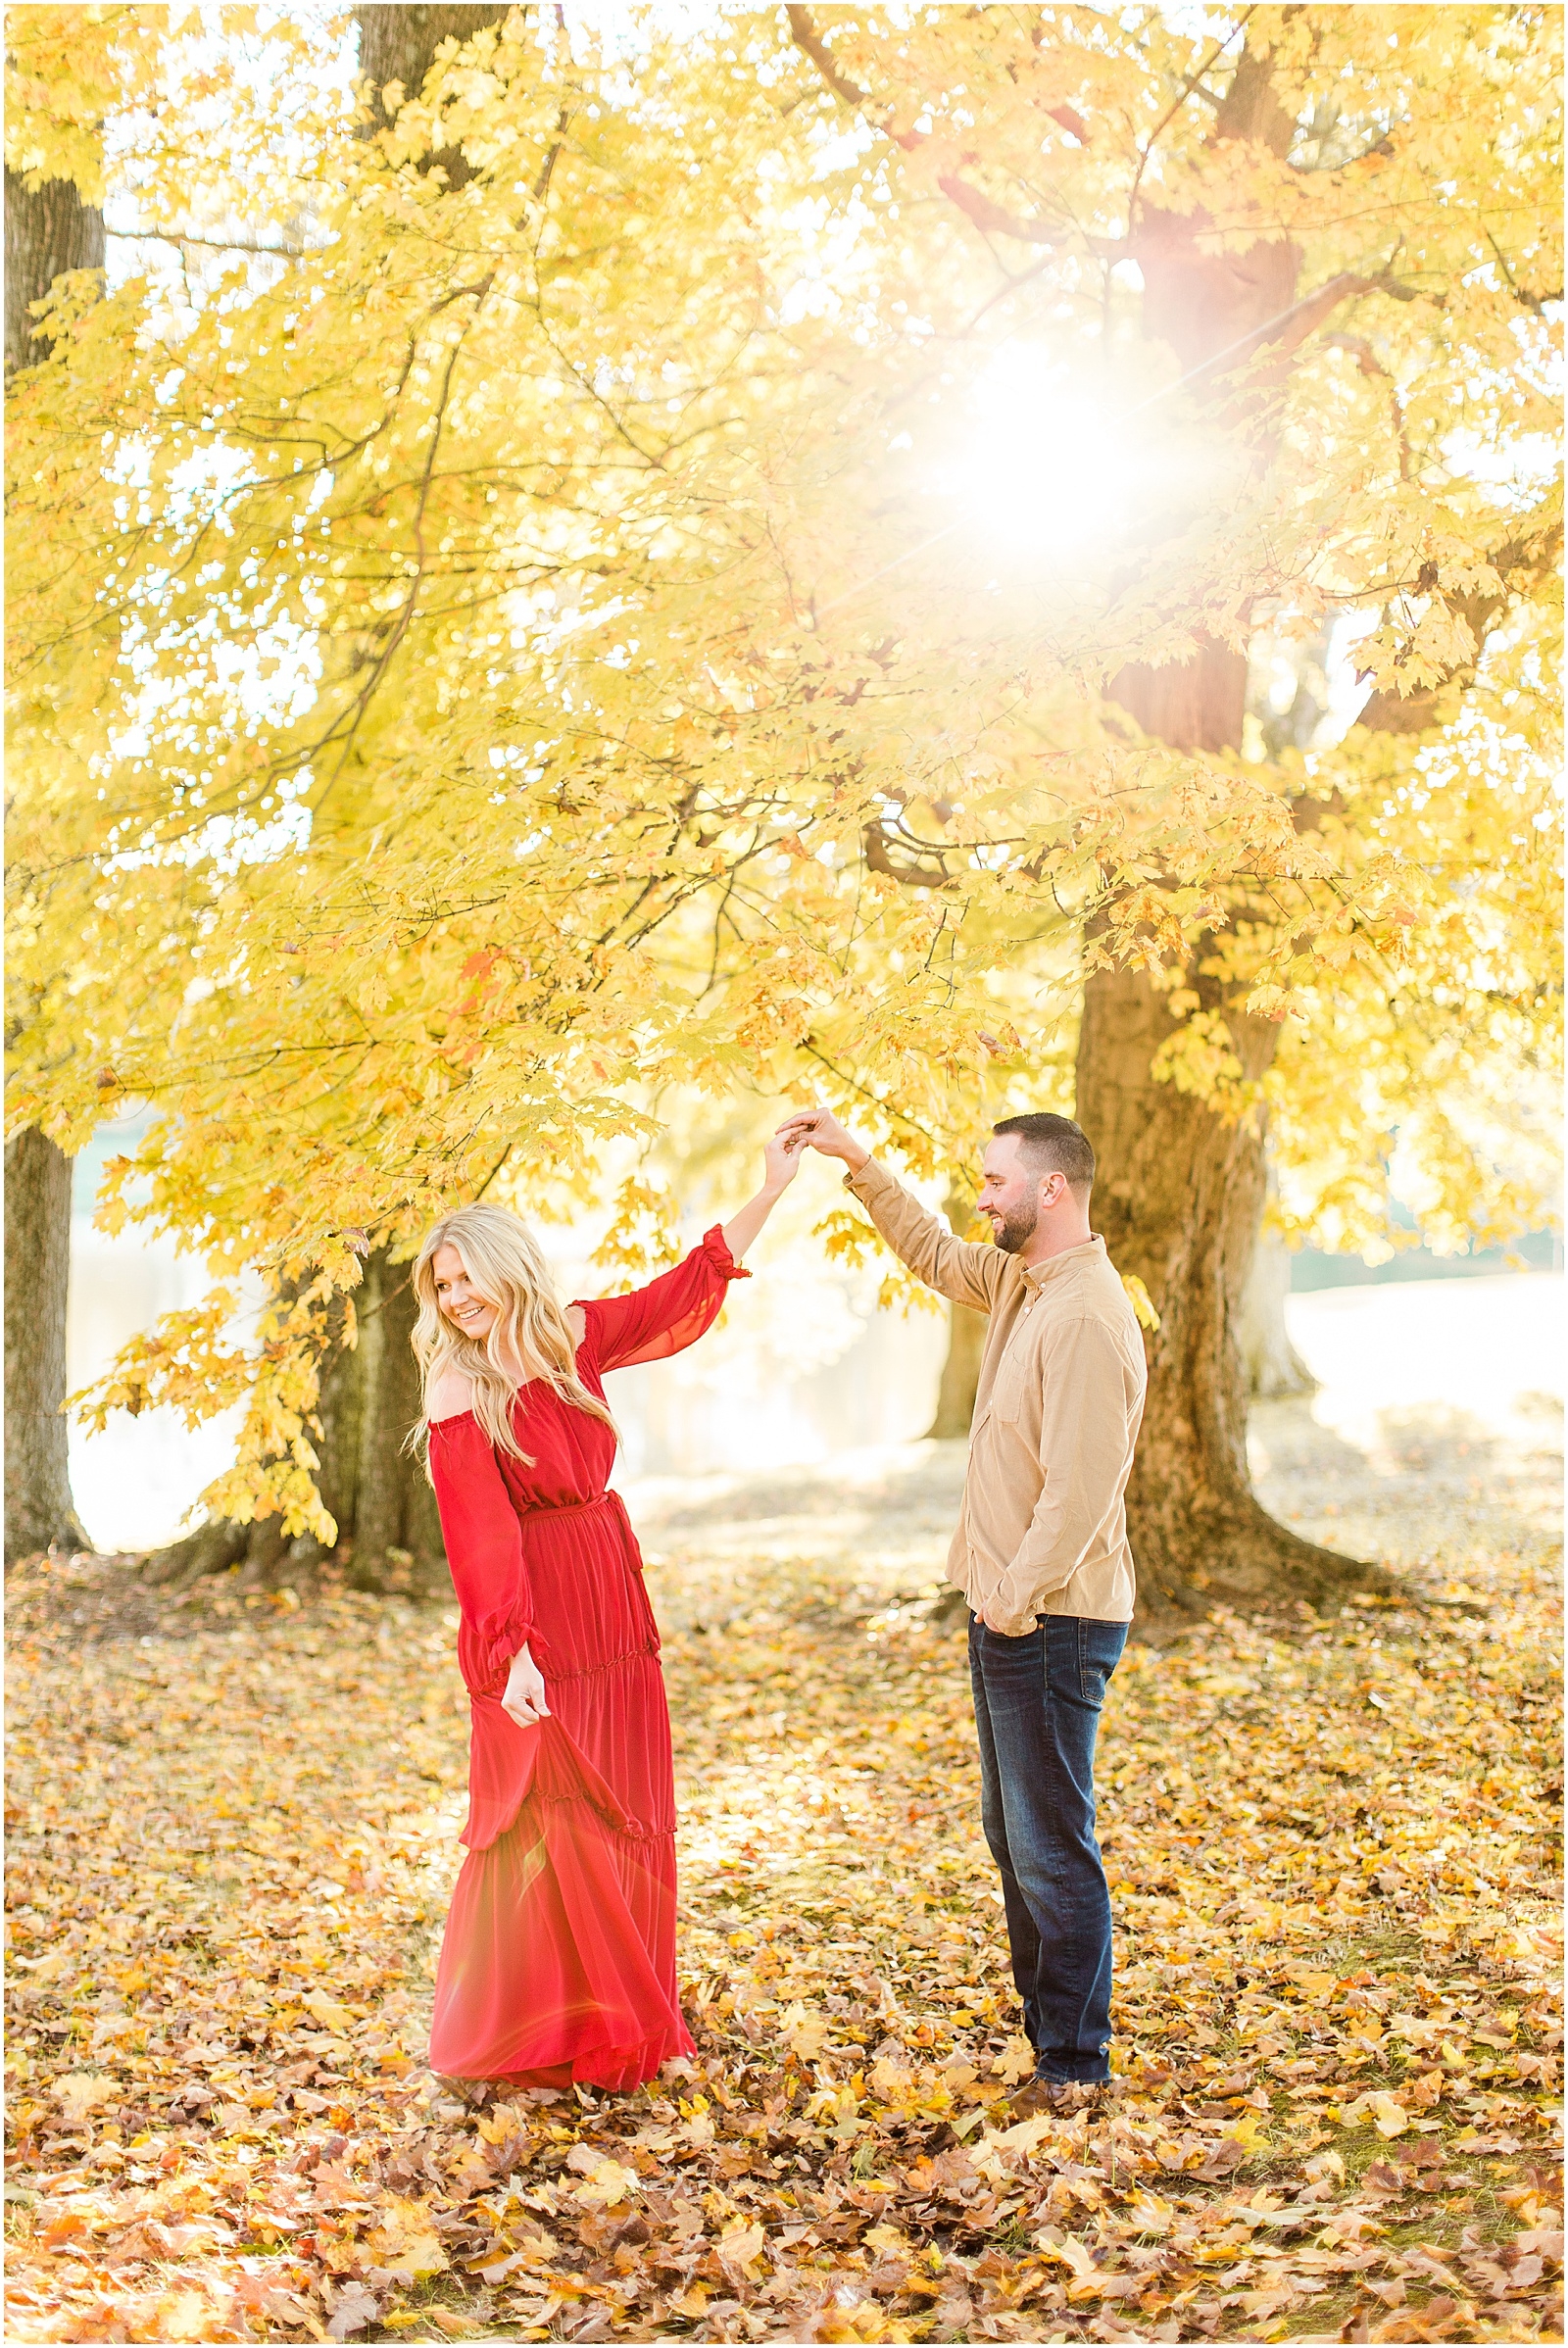 A Southern Indiana Engagement Session | Charleston and Erin | Bret and Brandie Photography030.jpg